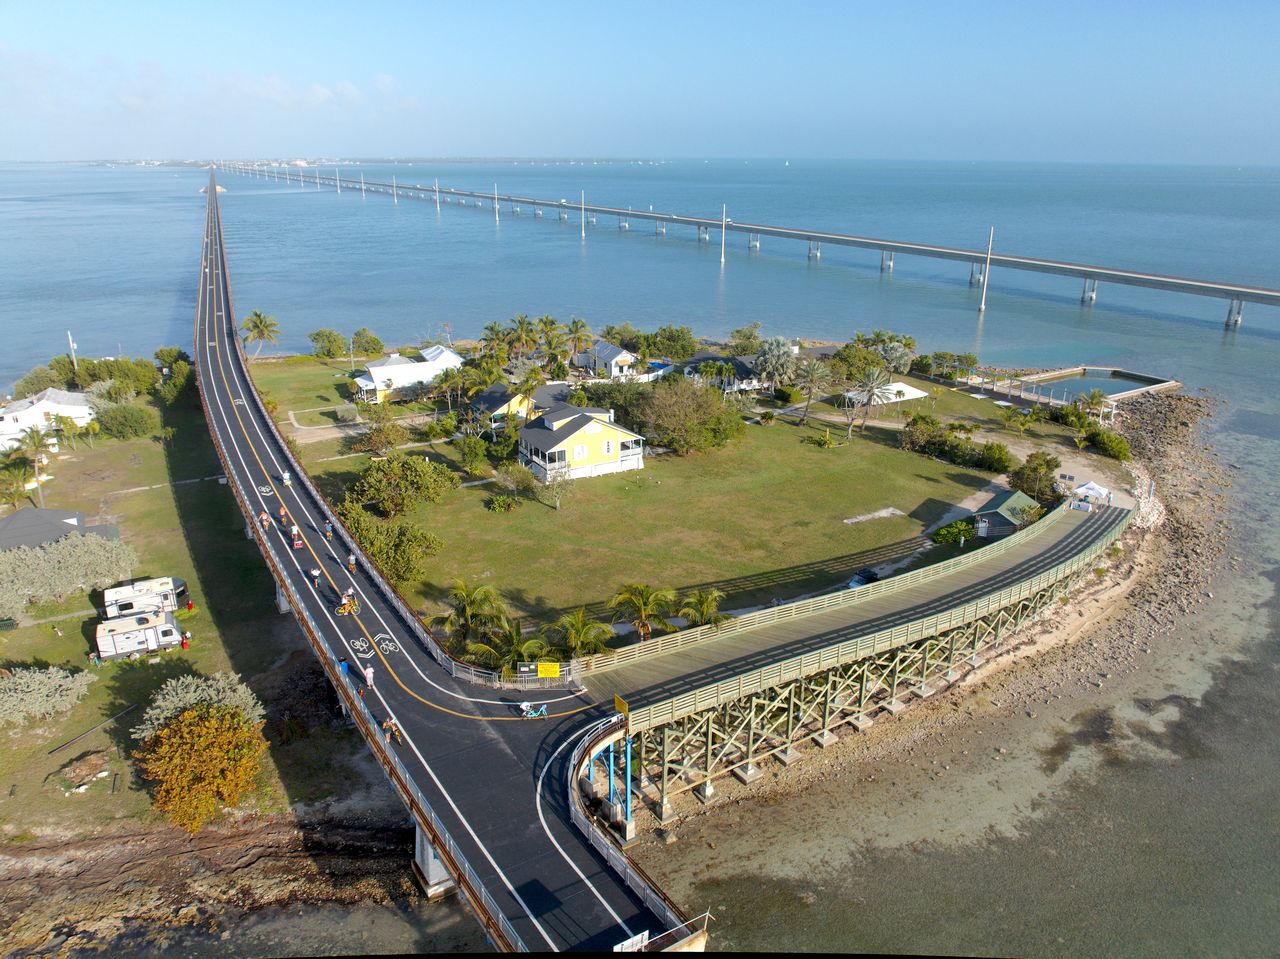 What’s New in the Florida Keys & Key West for Spring 2022